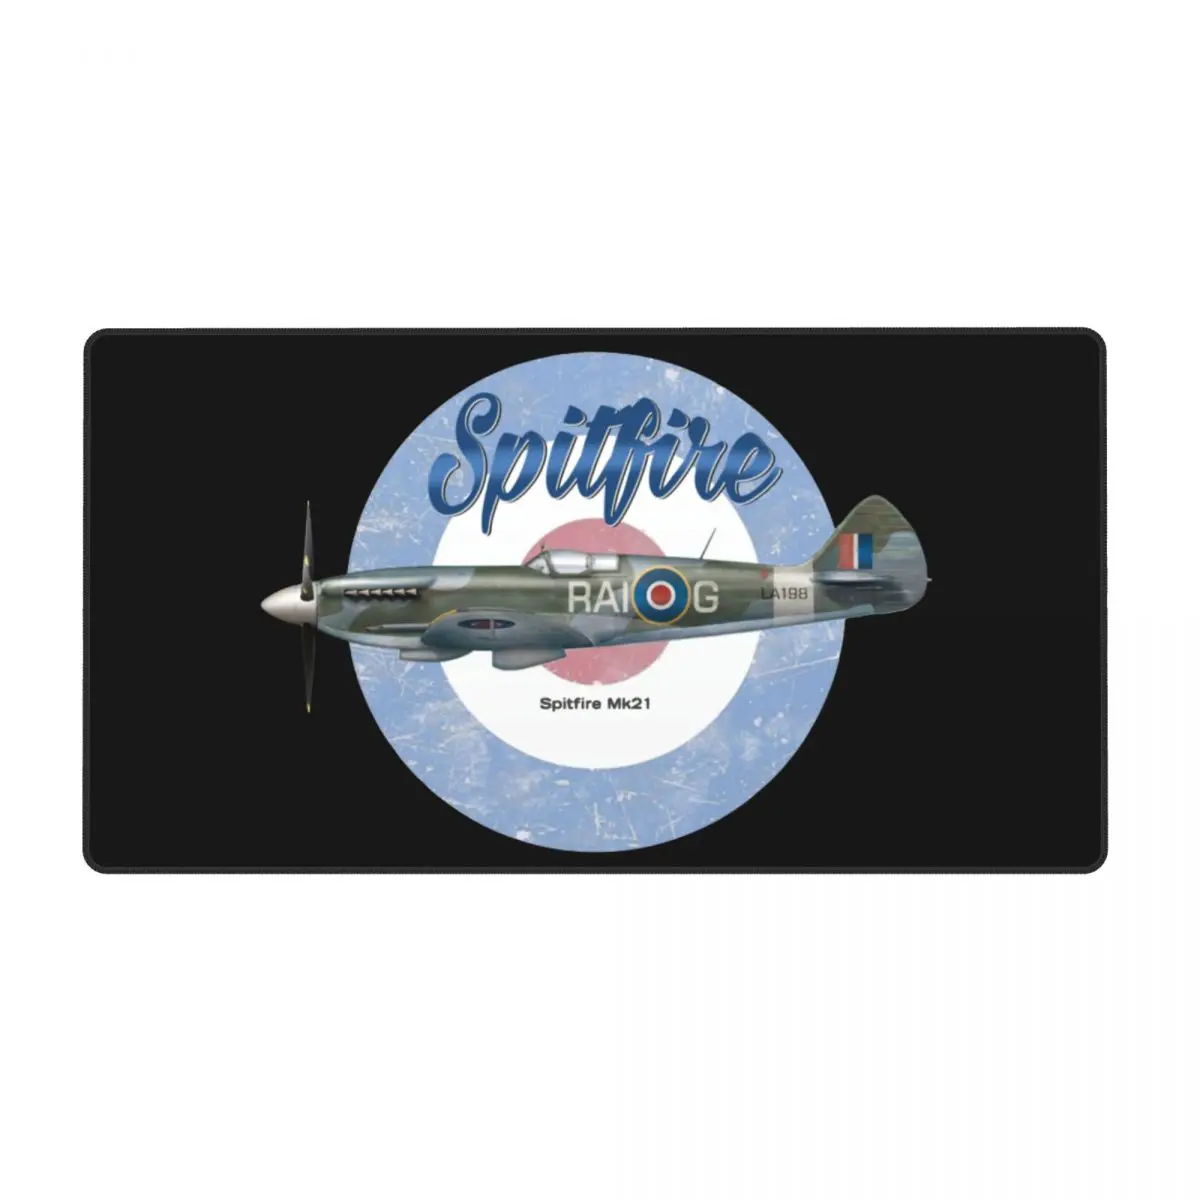 

Spitfire Mk21 Gaming Mouse Pad Keyboard Desk Mat Fighter Plane WW2 War Pilot Aircraft Airplane Printing Mousepad for Computer